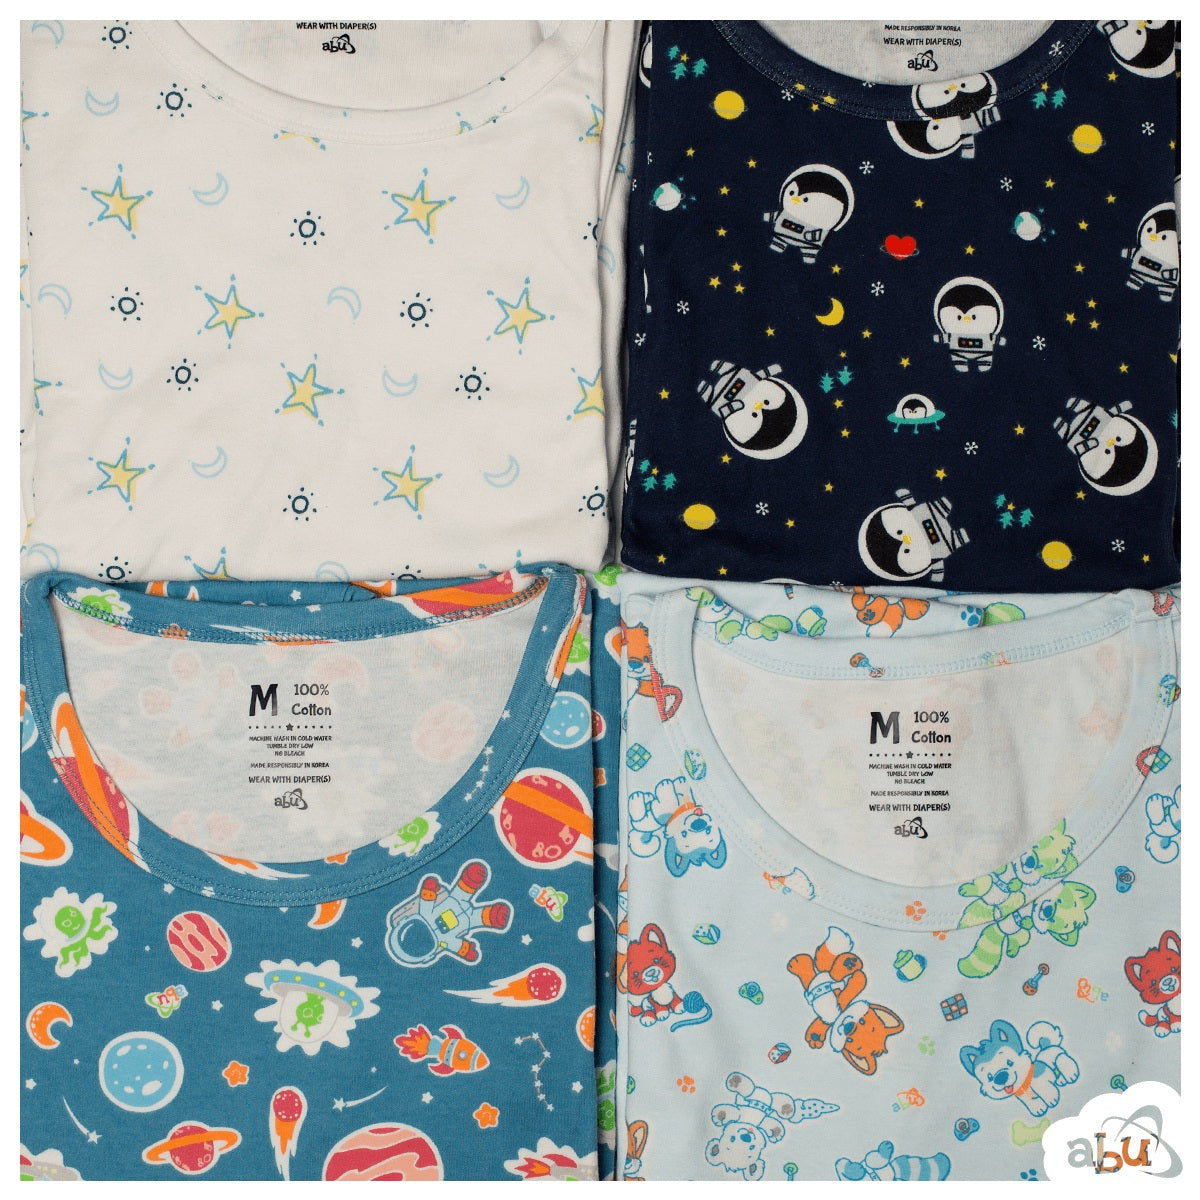 Diapersuits in all four patterns folded and laid out. Blue and yellow moons and stars on a white background. Penguins in space suits printed on a black background. Colorful planets, stars printed on blue background. Colorful animal characters printed on a light blue background.